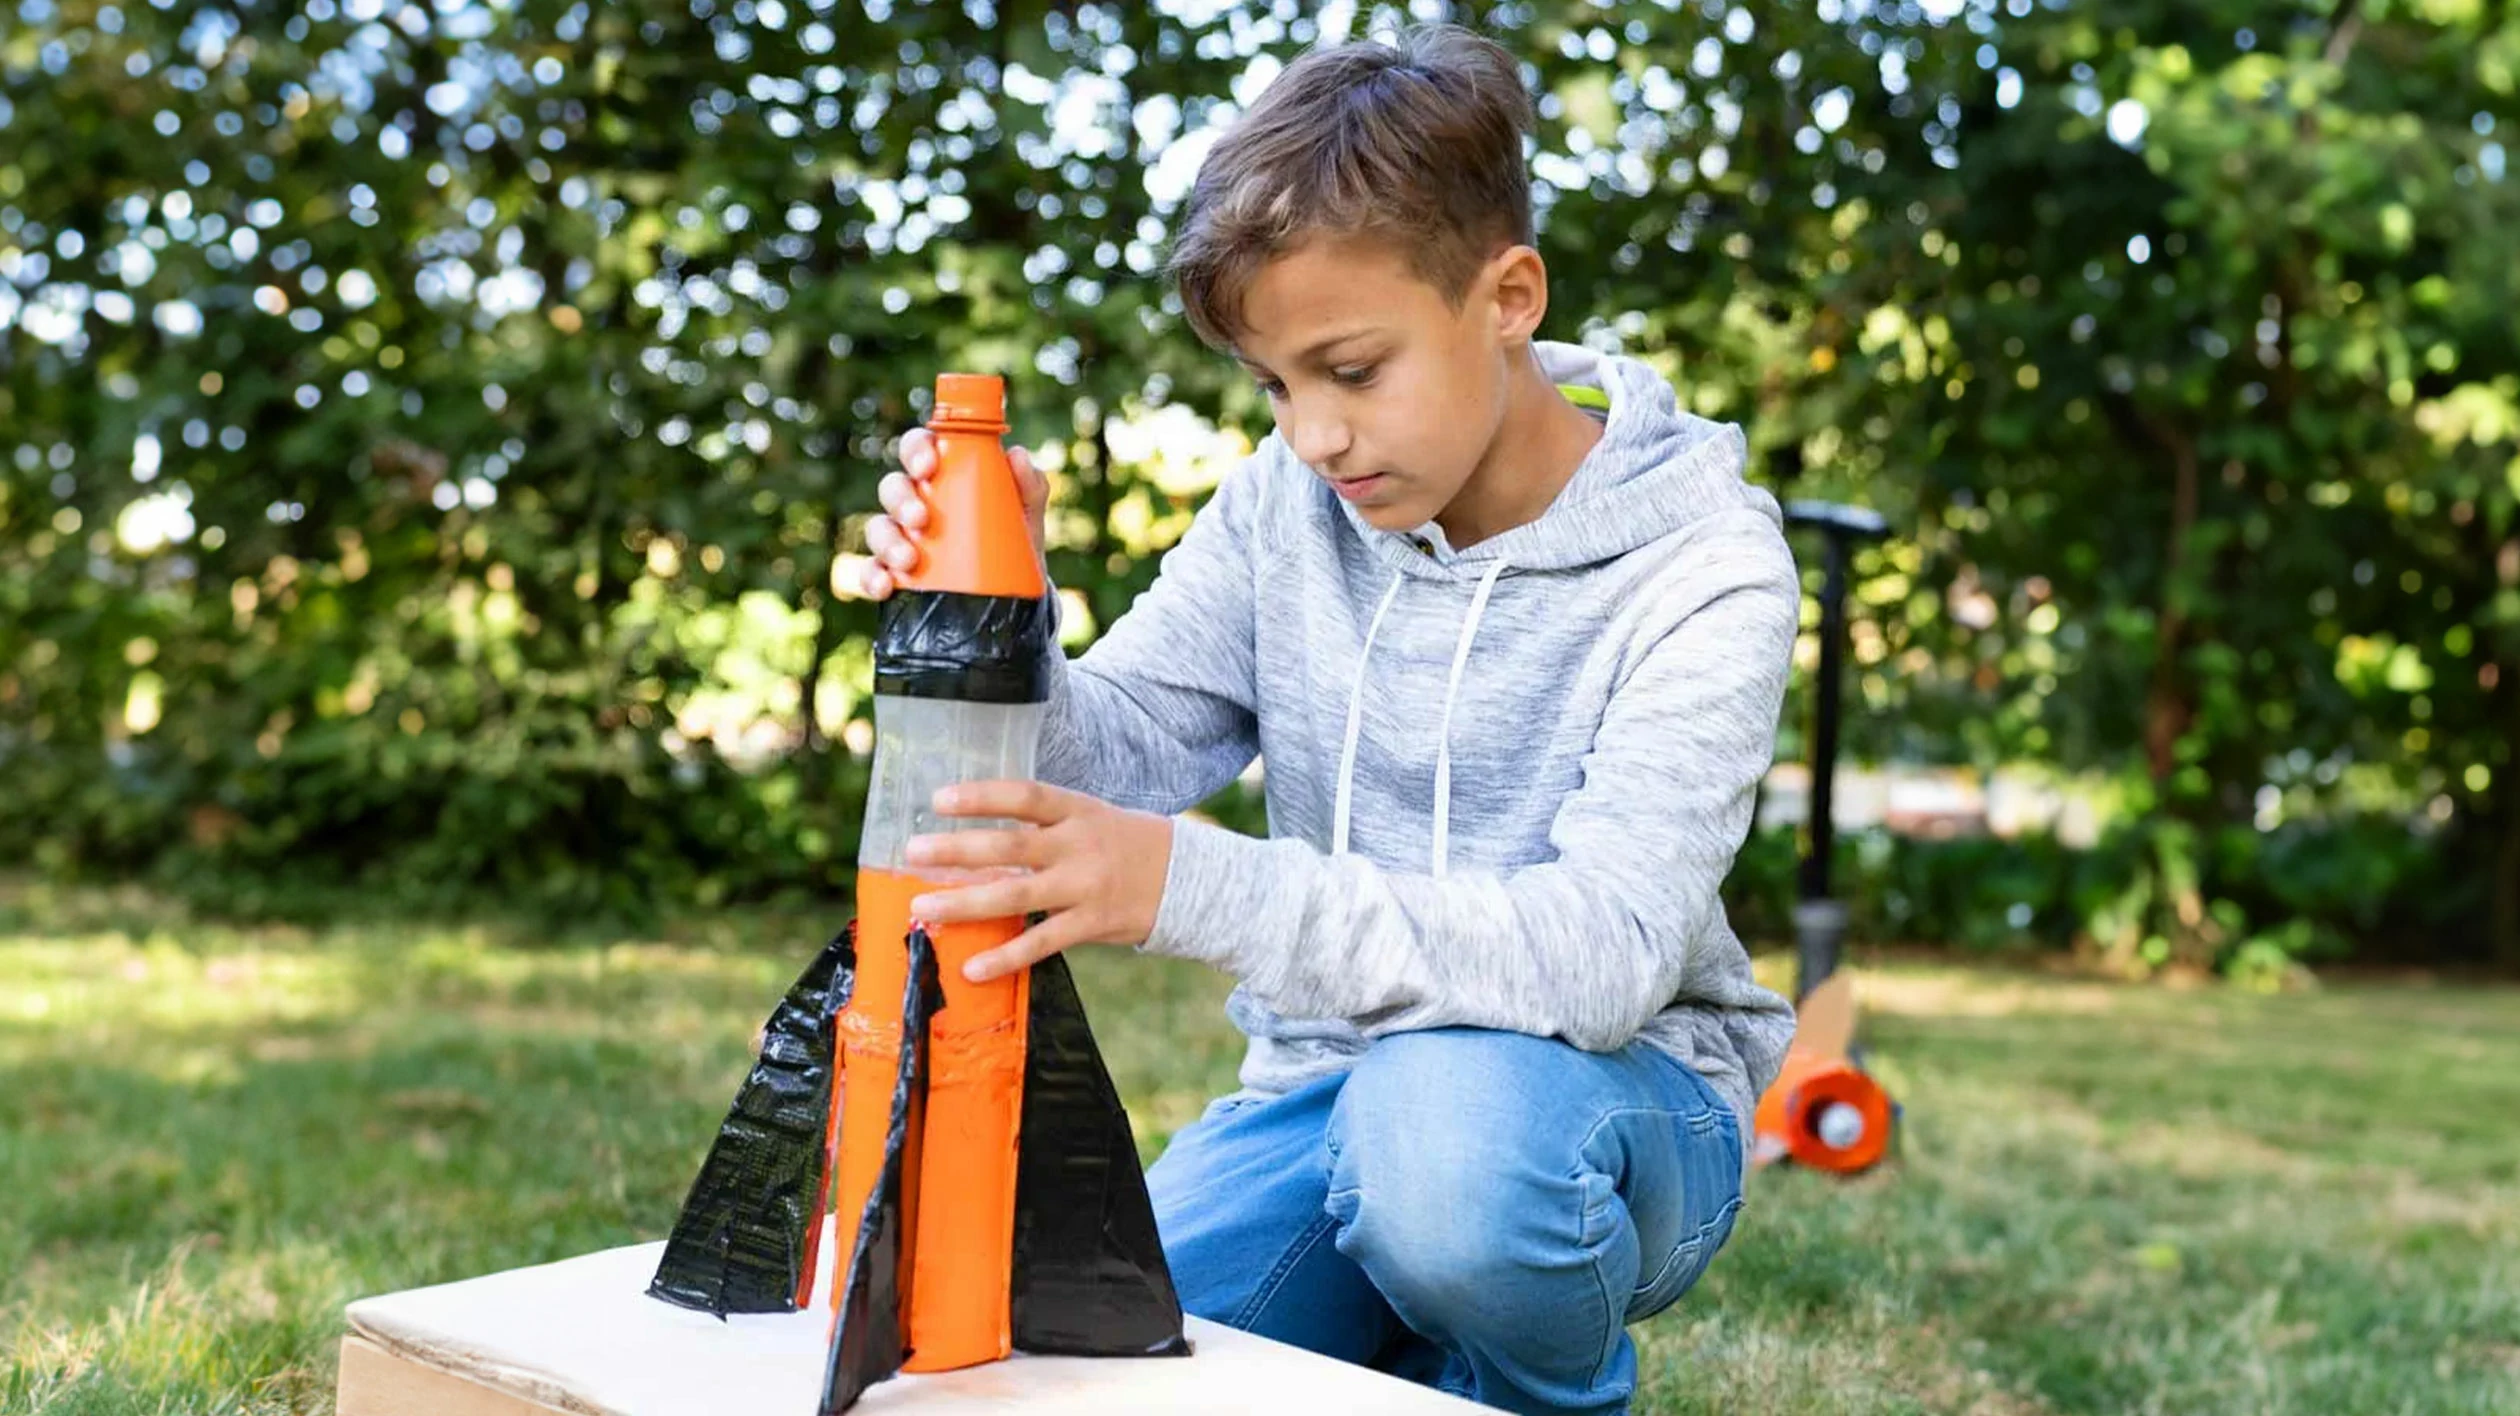 A boy kneels in the grass and tinkers with a children's toy in the shape of a rocket.